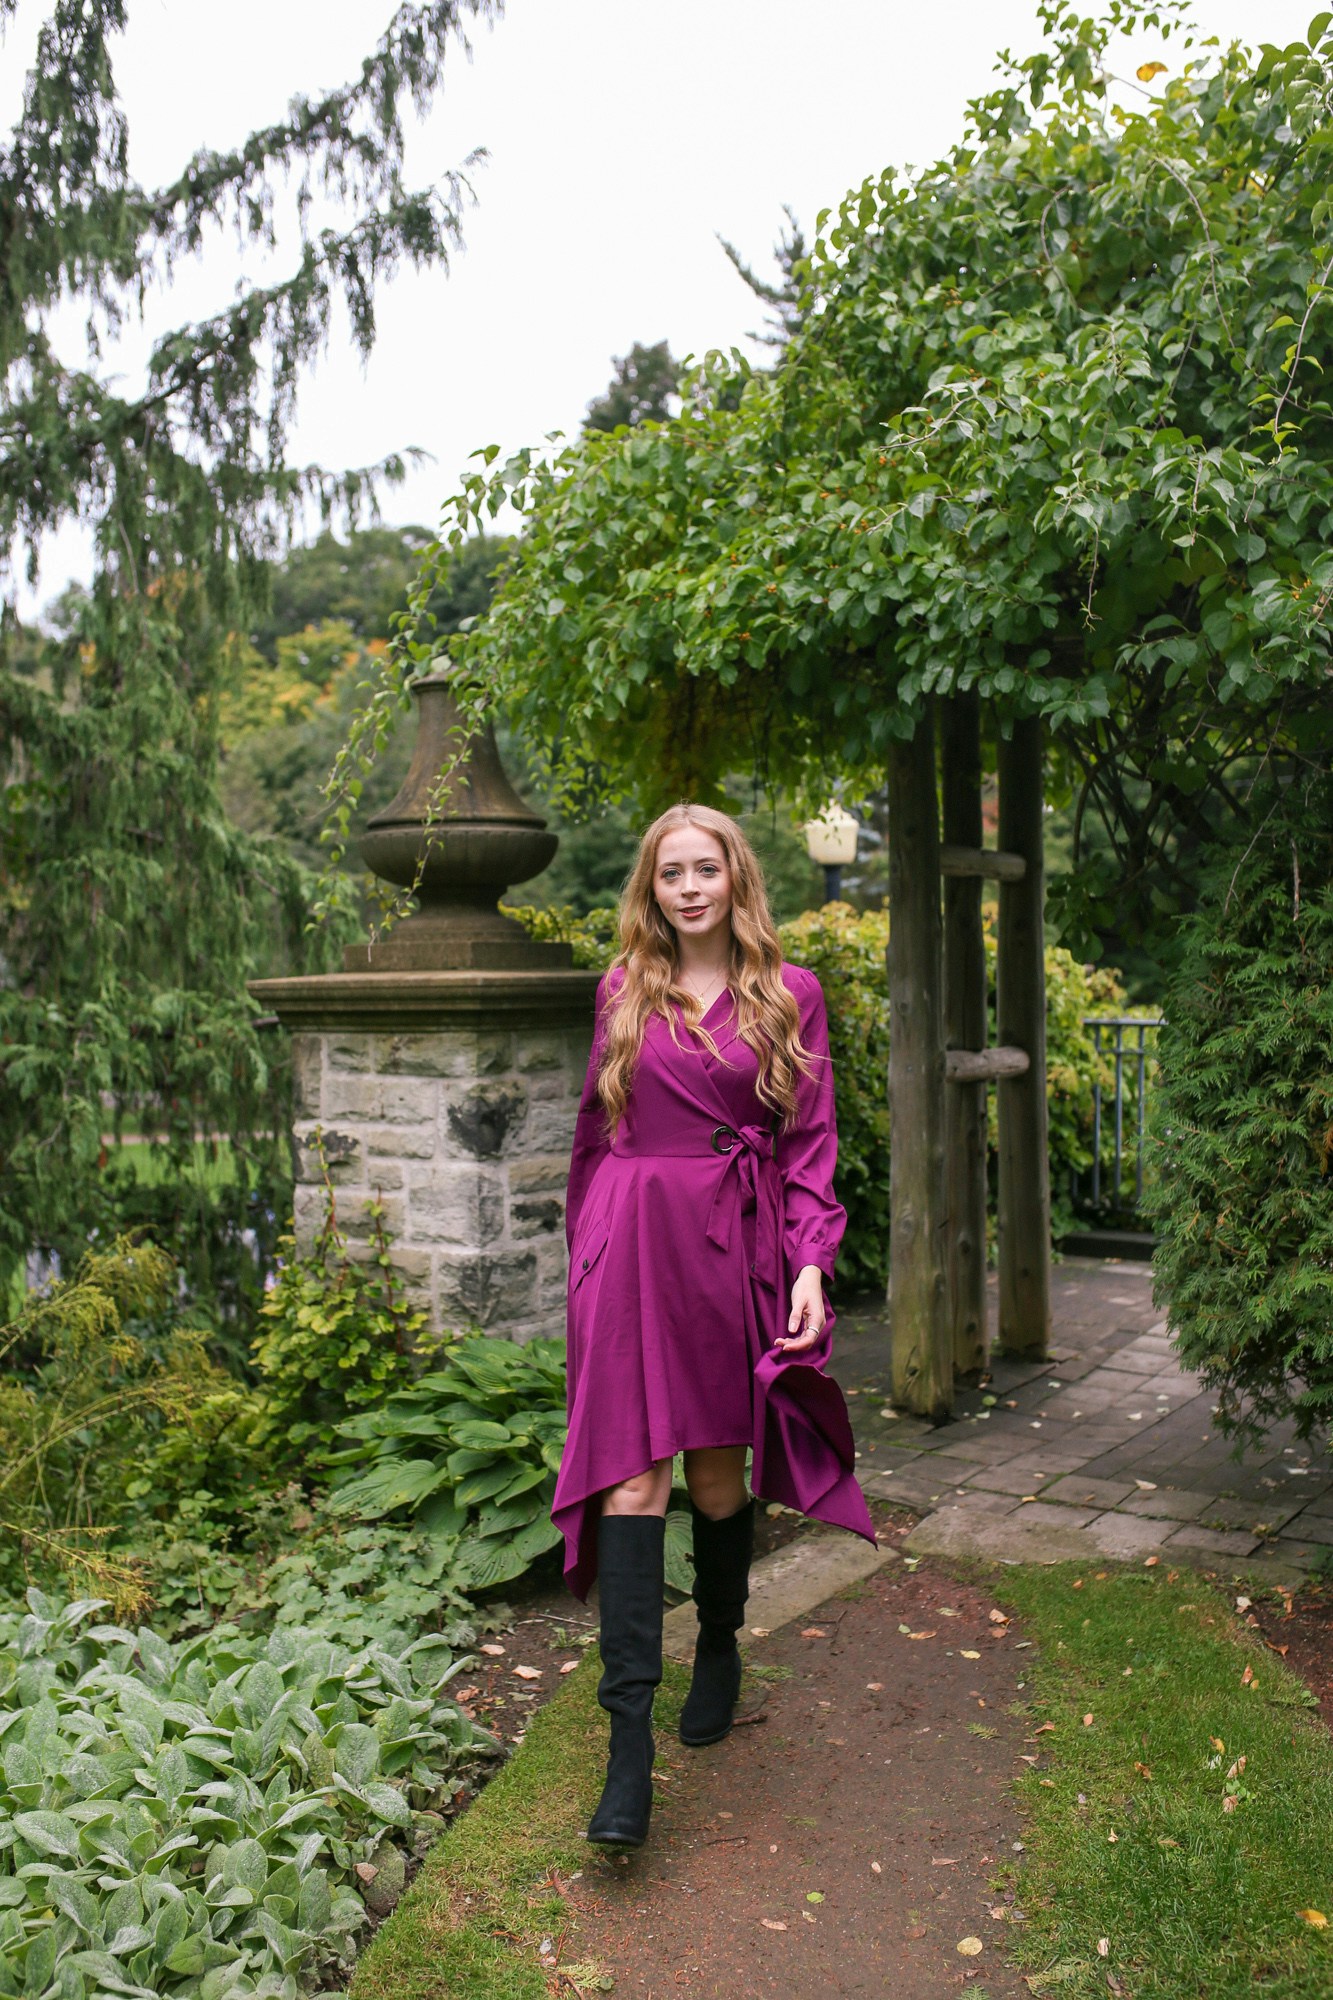 Chriselle Lim Collection Review: Wren Trench Dress and Unisa Indyia Over the Knee boots from DSW.